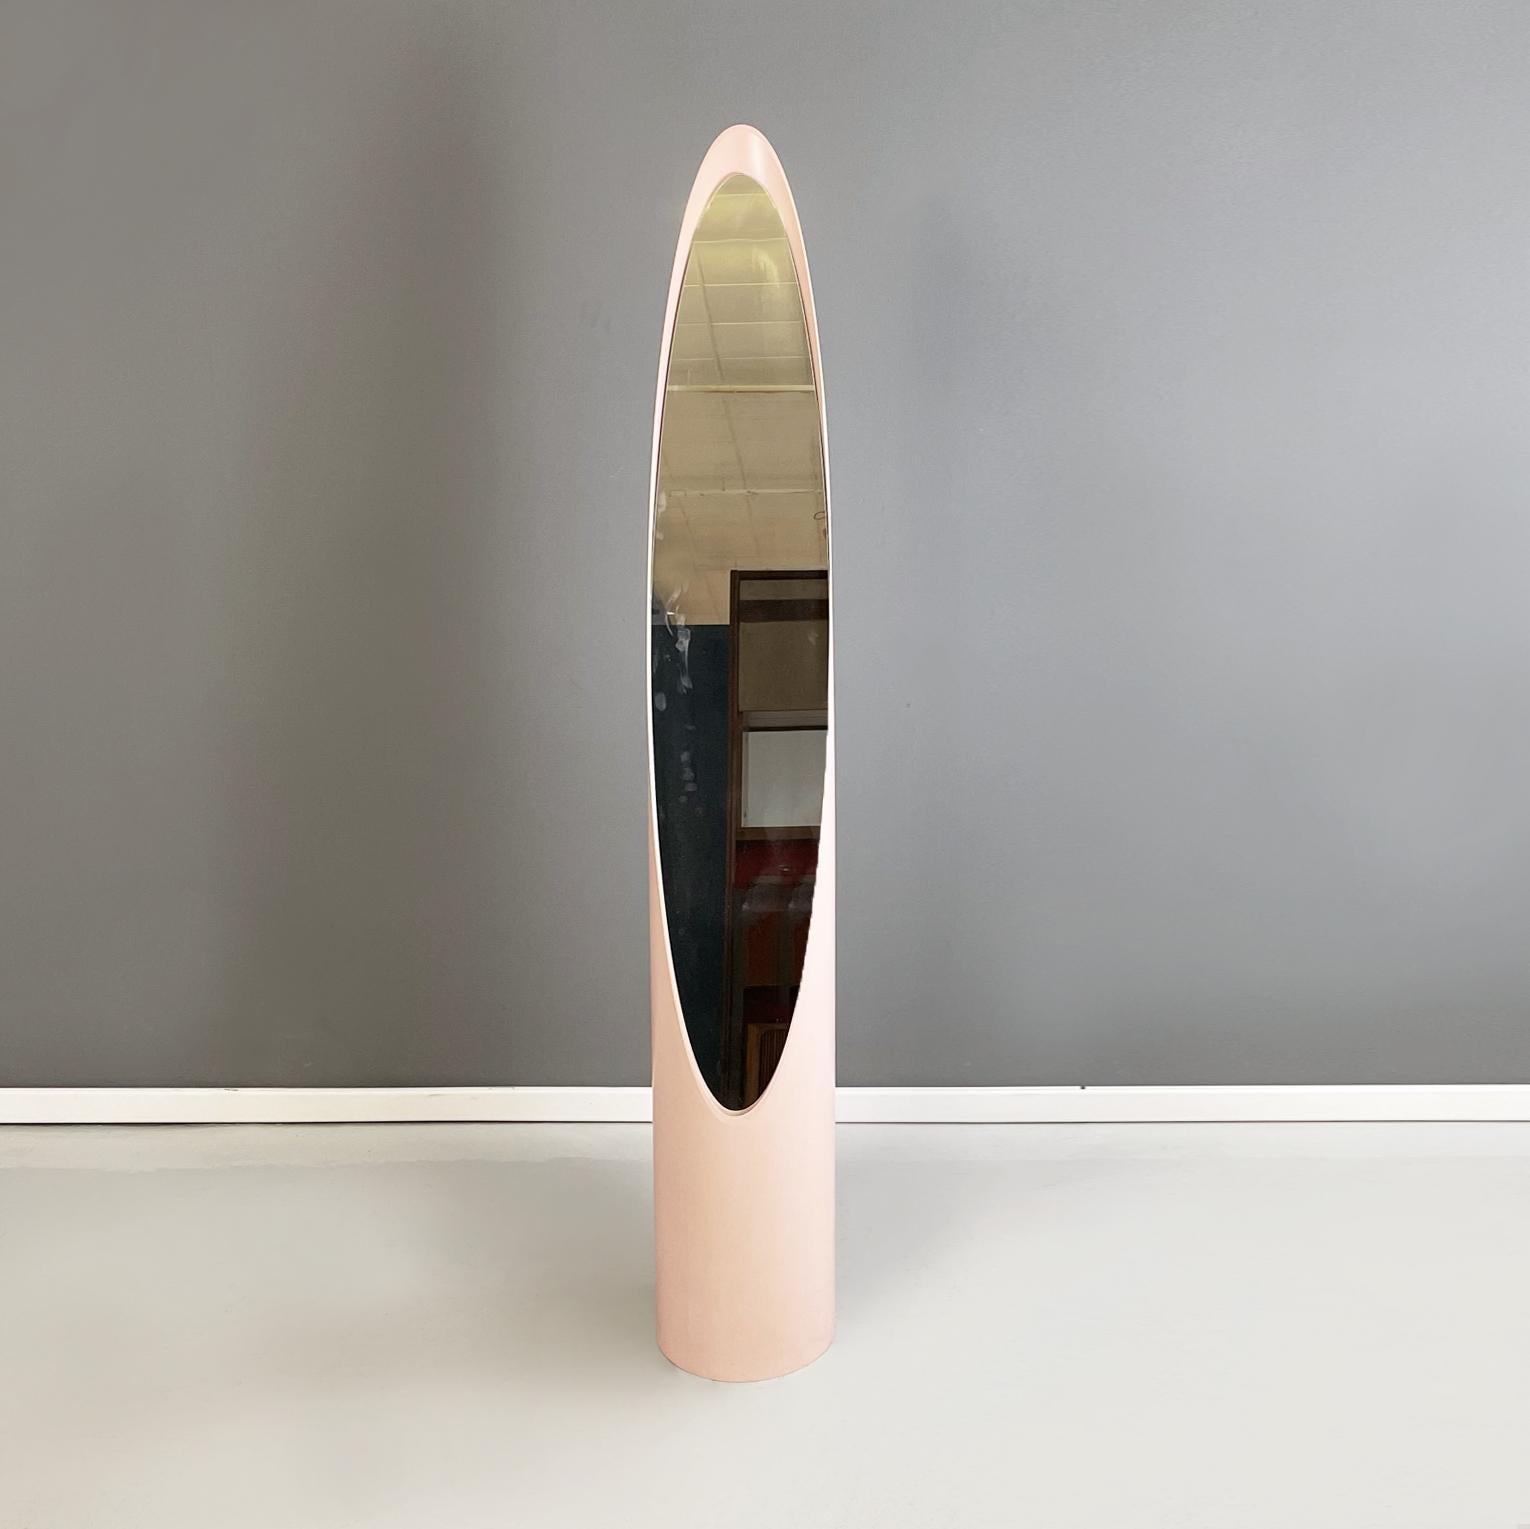 Italian space age pink Floor mirror Unghia or Lipstick by Rodolfo Bonetto 1970s
Self-supporting floor mirror mod. Unghia, also known as Lipstick, with a round base with light pink ABS plastic structure. The elliptical mirror is slightly inclined due